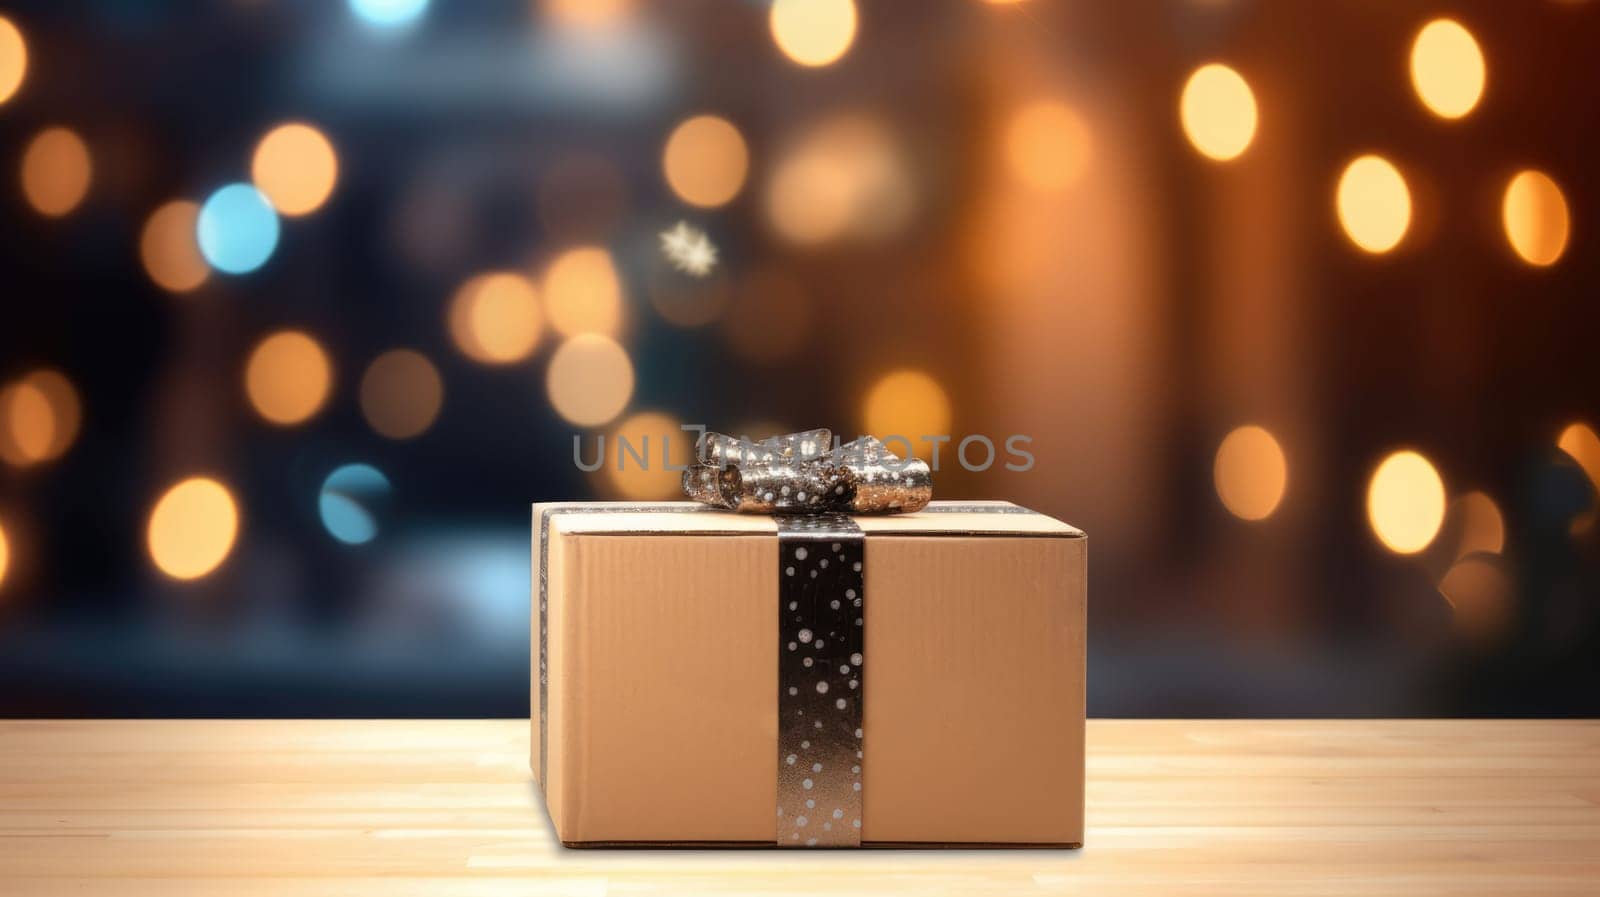 Delivered parcel box under Christmas tree. Christmas online shopping. Black Friday sale